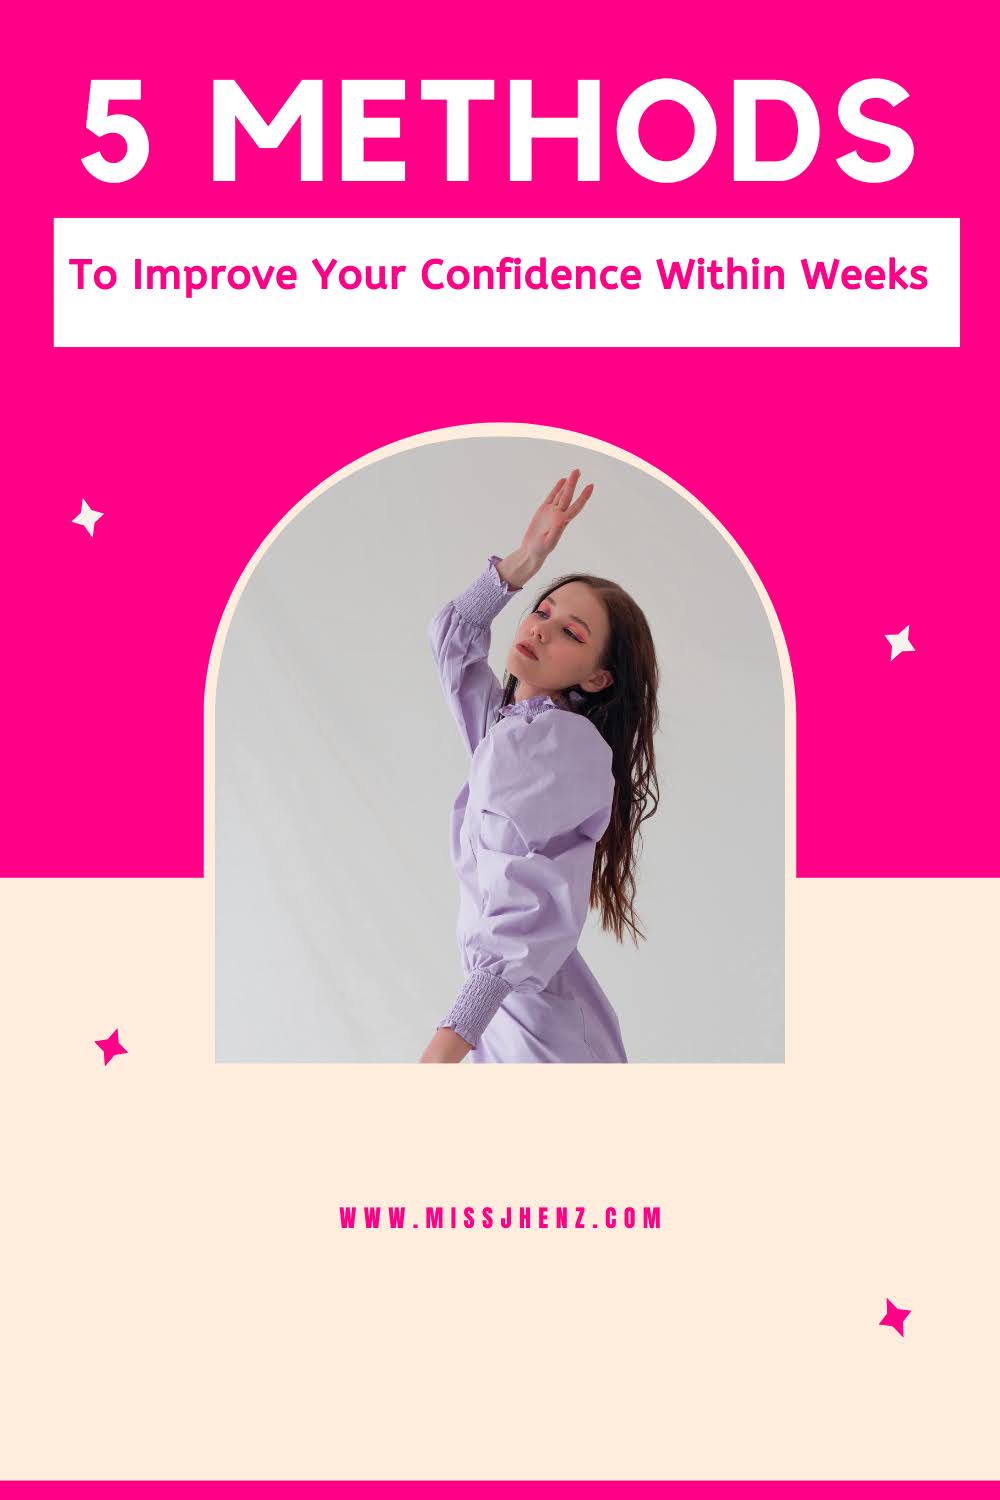 5 Methods To Improve Your Confidence Within Weeks